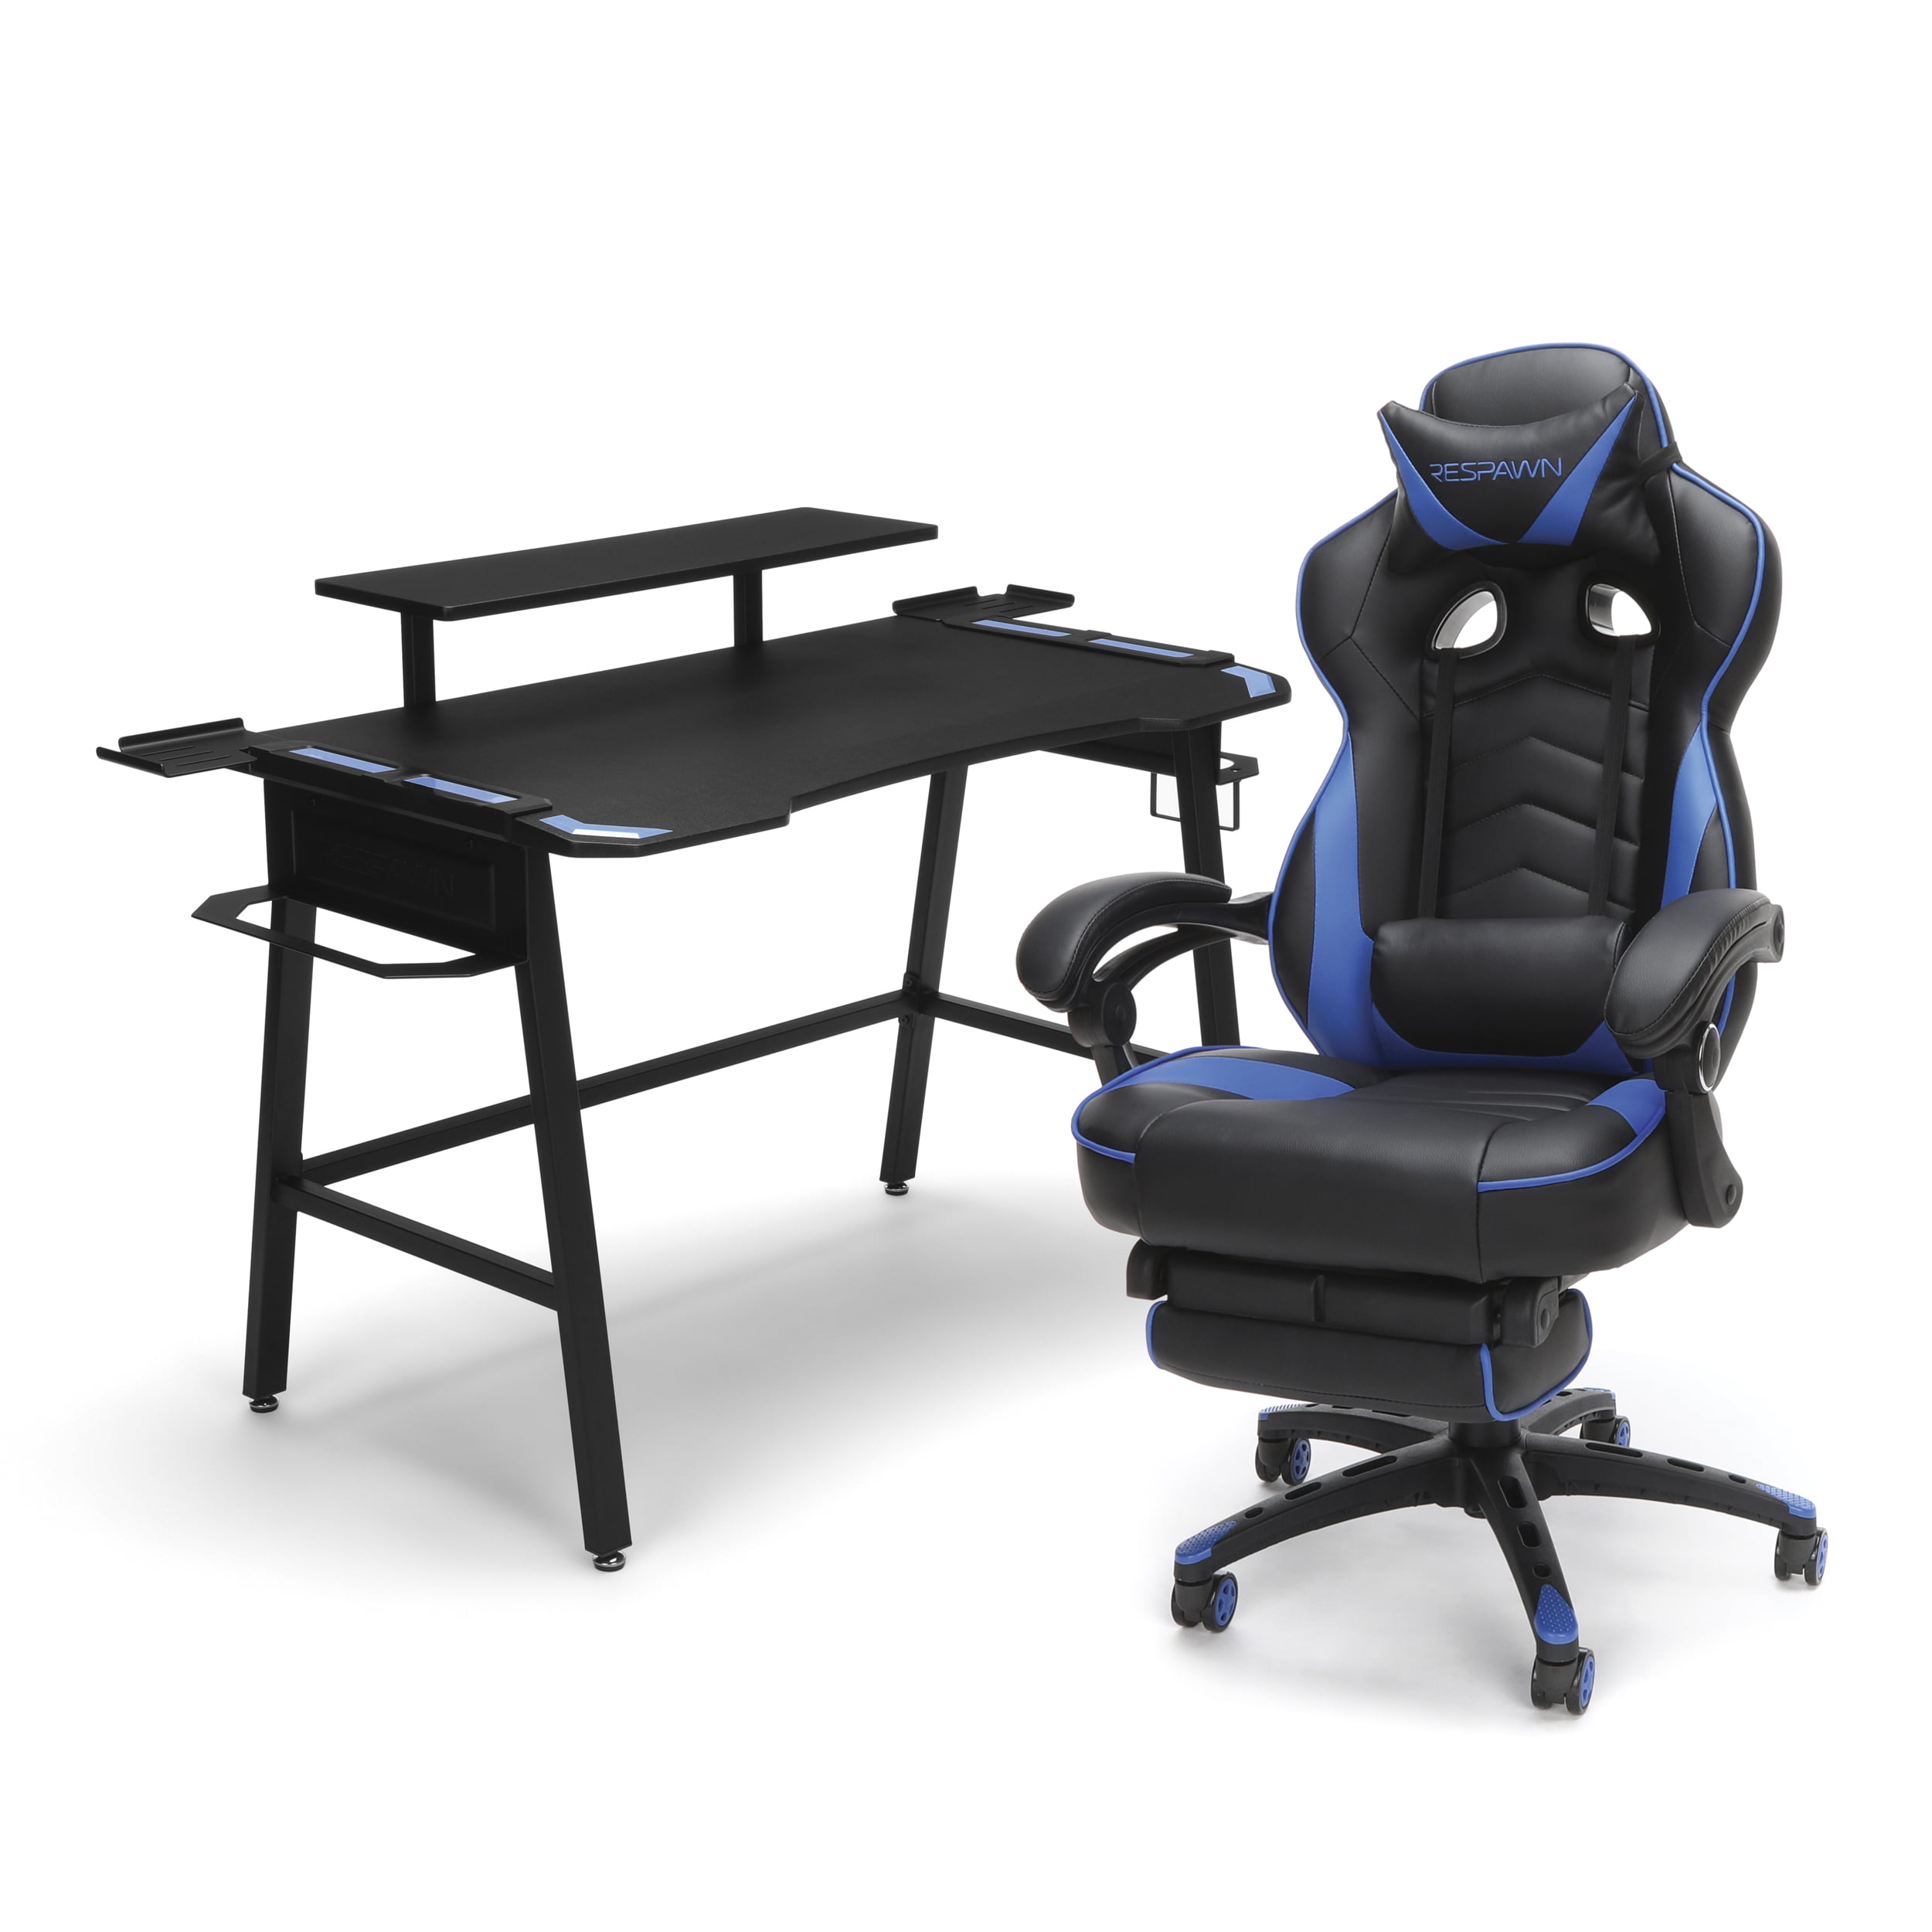 Respawn Gaming Chair Rsp 110 And Gaming Desk Rsp 1010 Bundle